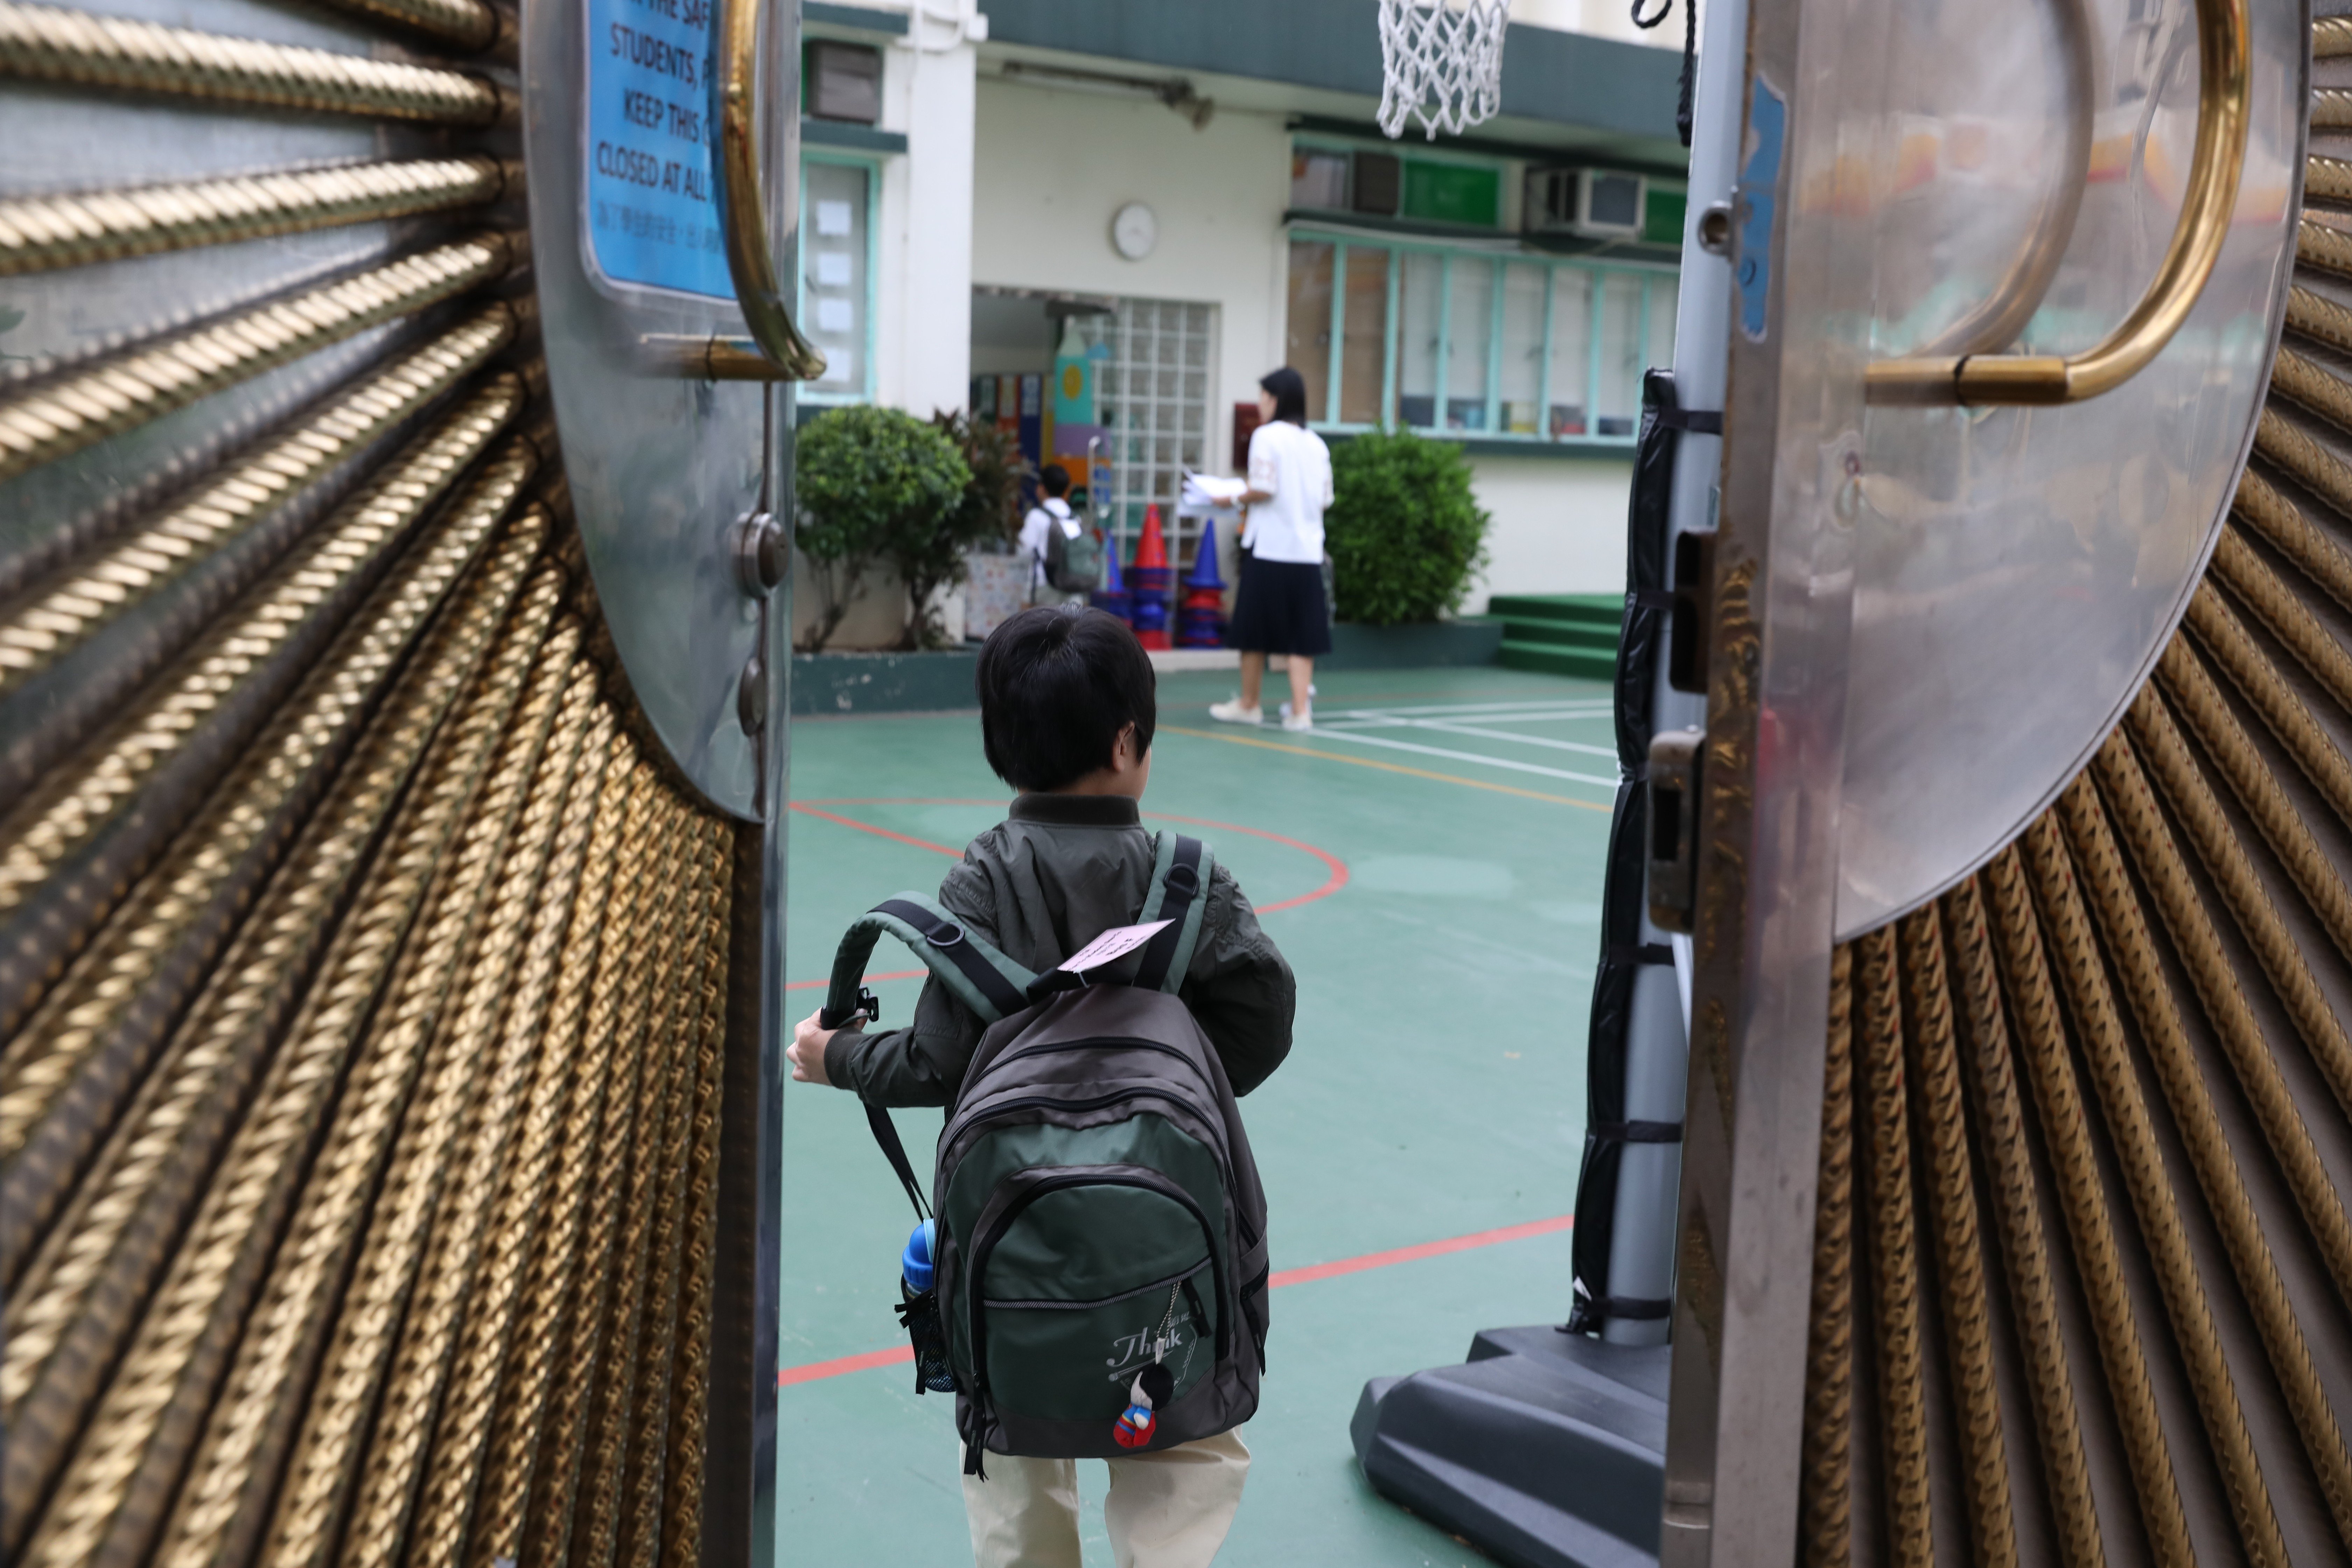 Diversity could be improved in Hong Kong schools if scholarships were matched with the needs of the city’s ethnic minority children, according to The Zubin Foundation. Photo: Nora Tam